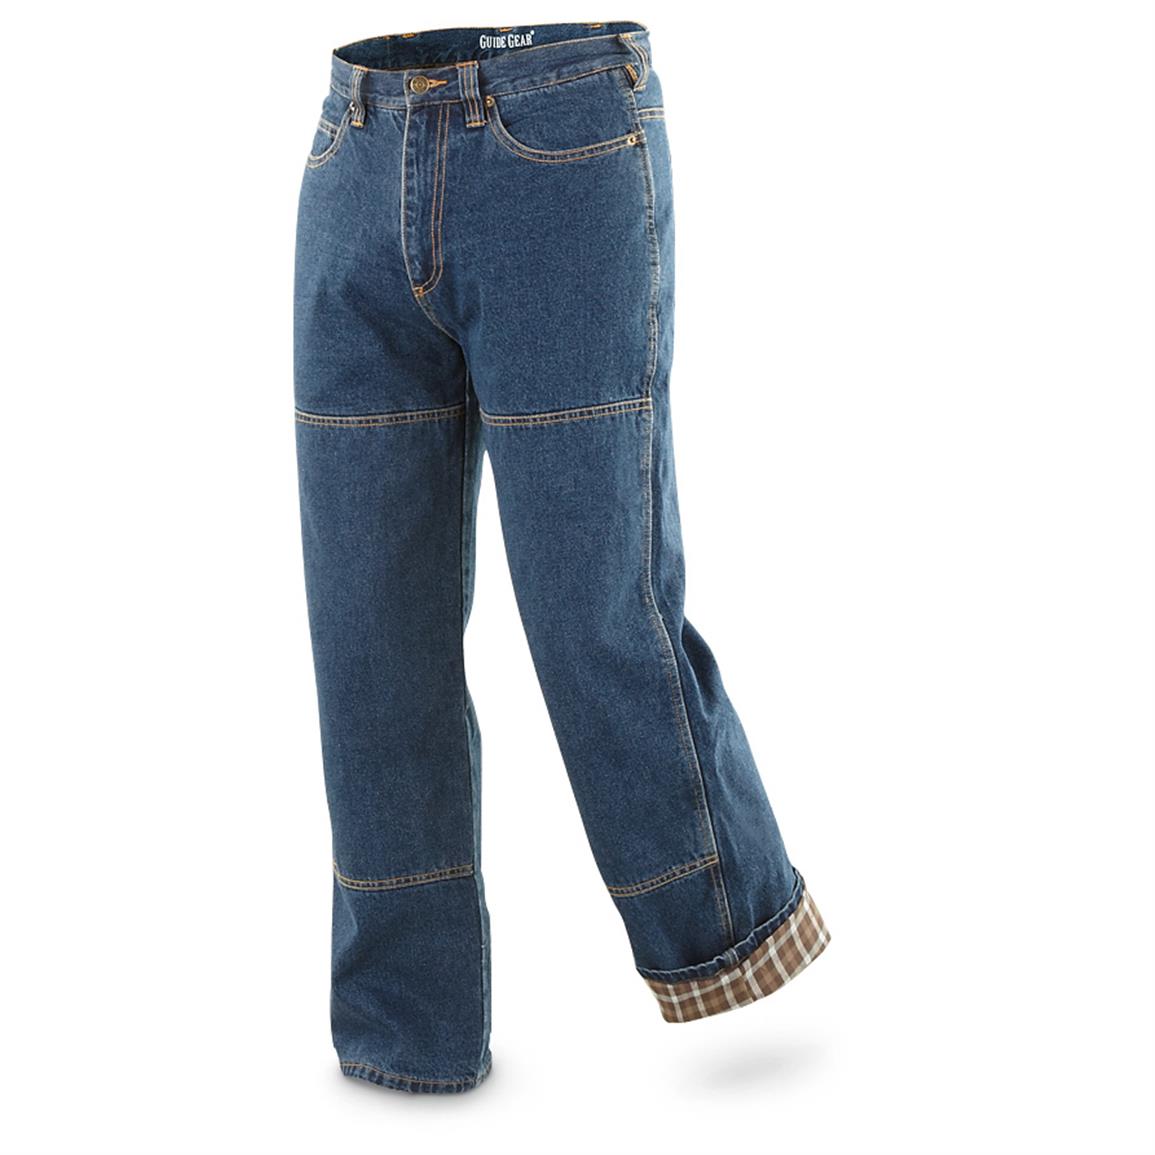 flannel lined jeans canada